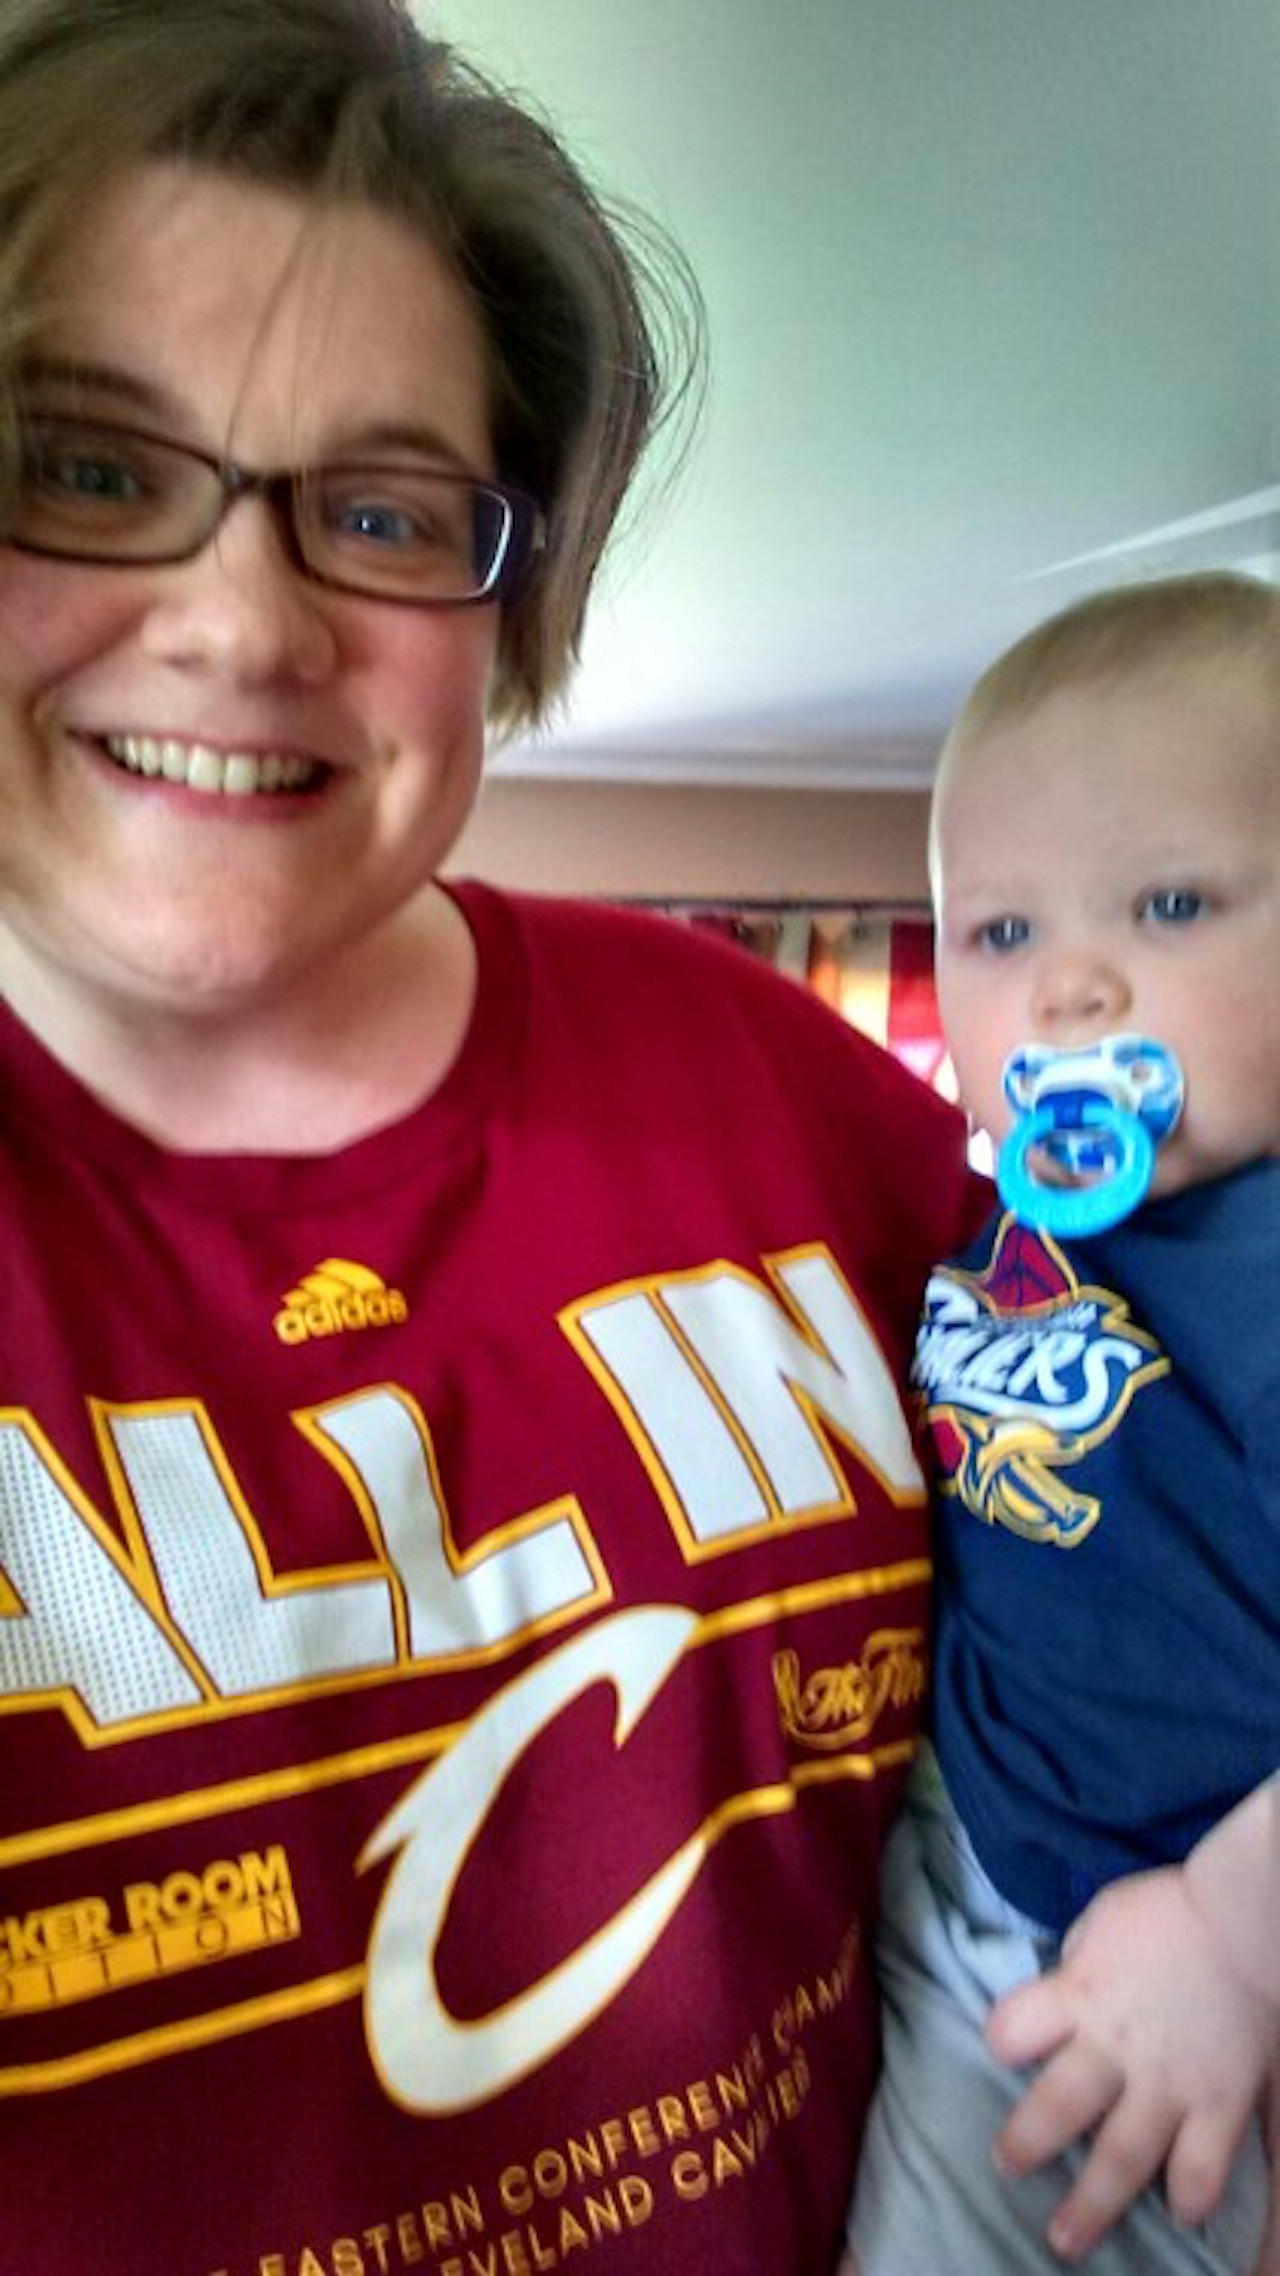 mom in cavs shirt holding baby in cavs shirt